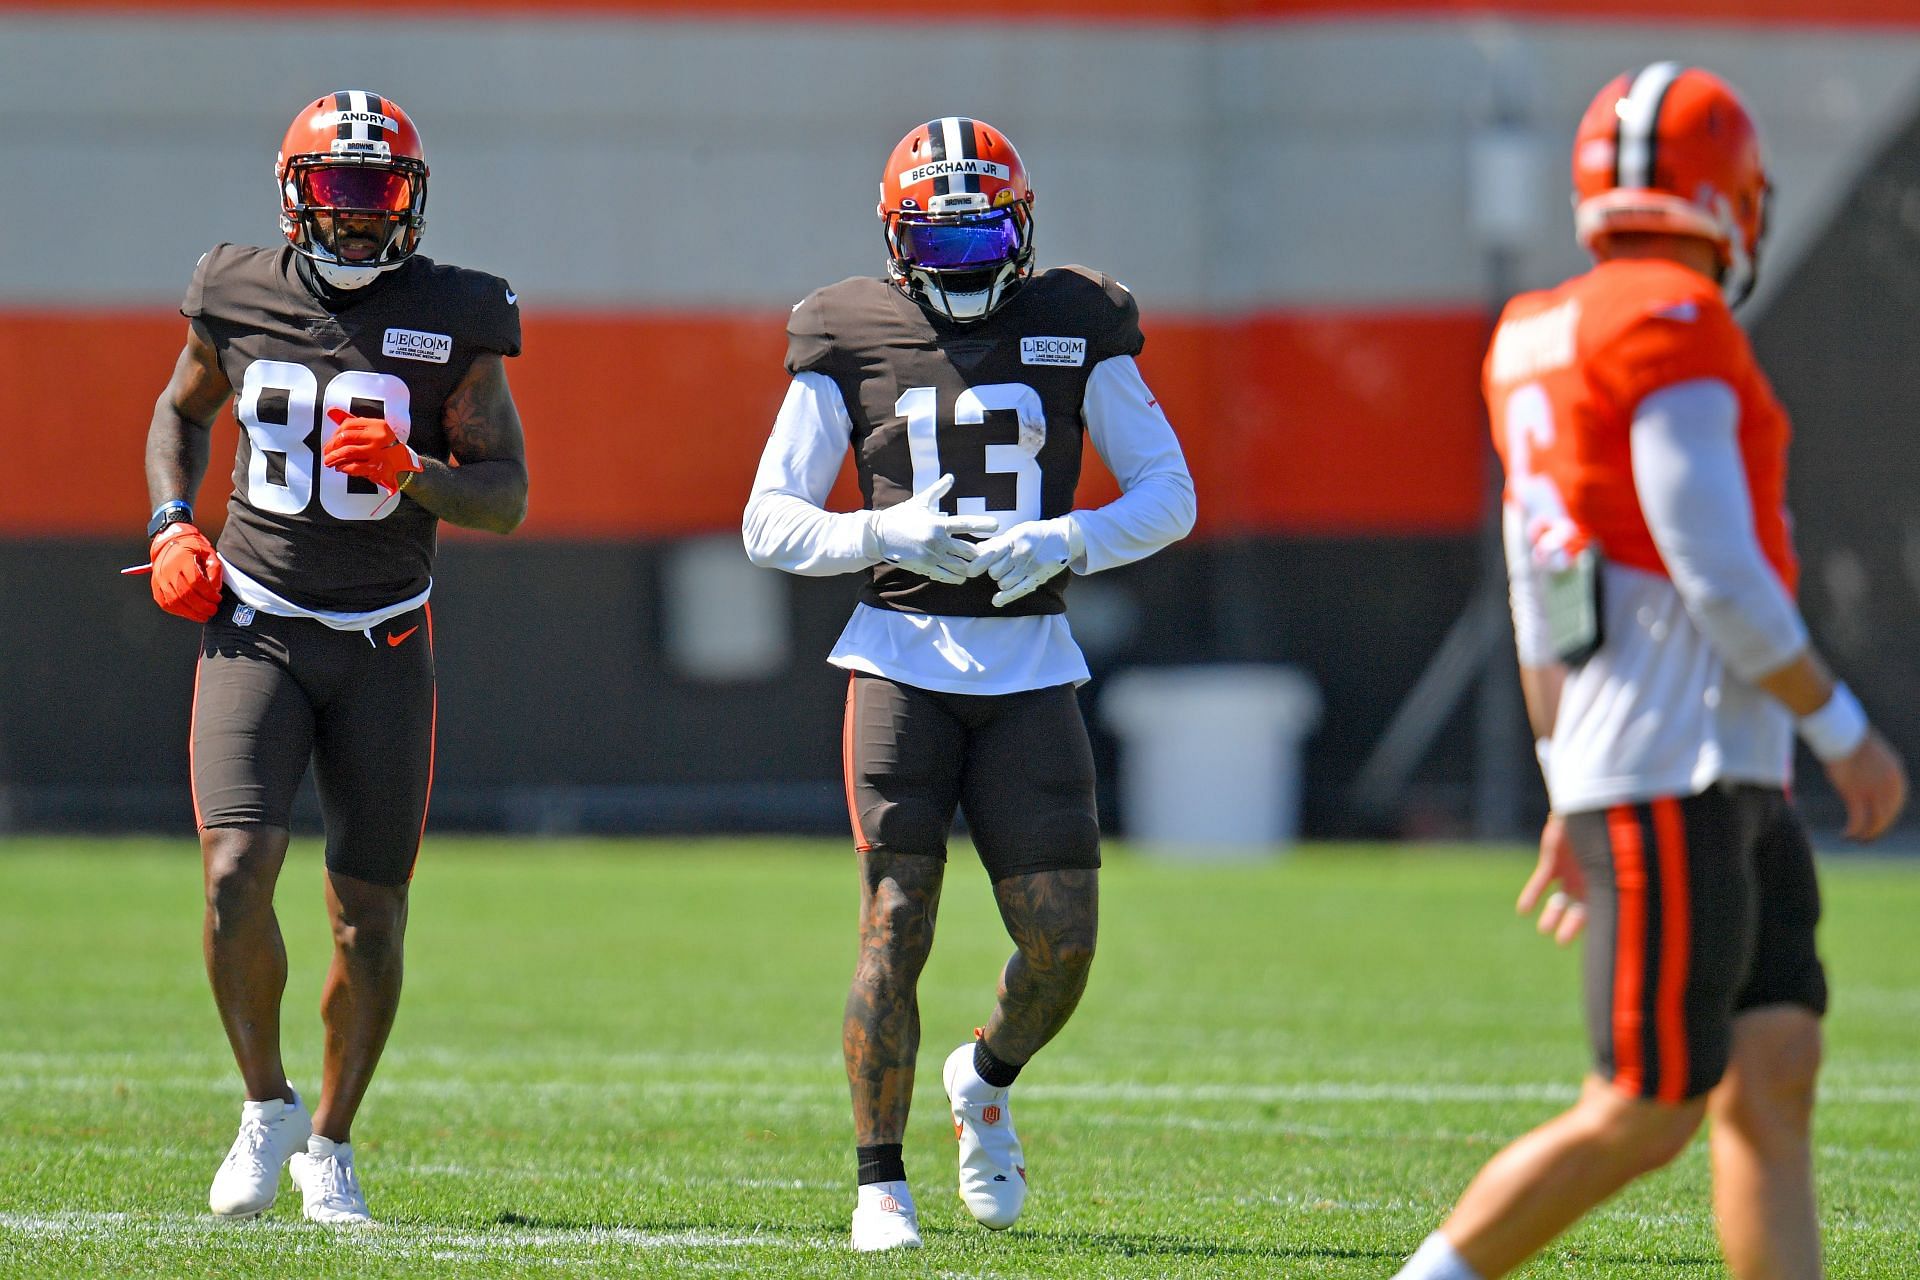 Baker Mayfield is still on the roster of the Browns while Odell Beckham Jr. is recovering from an injury